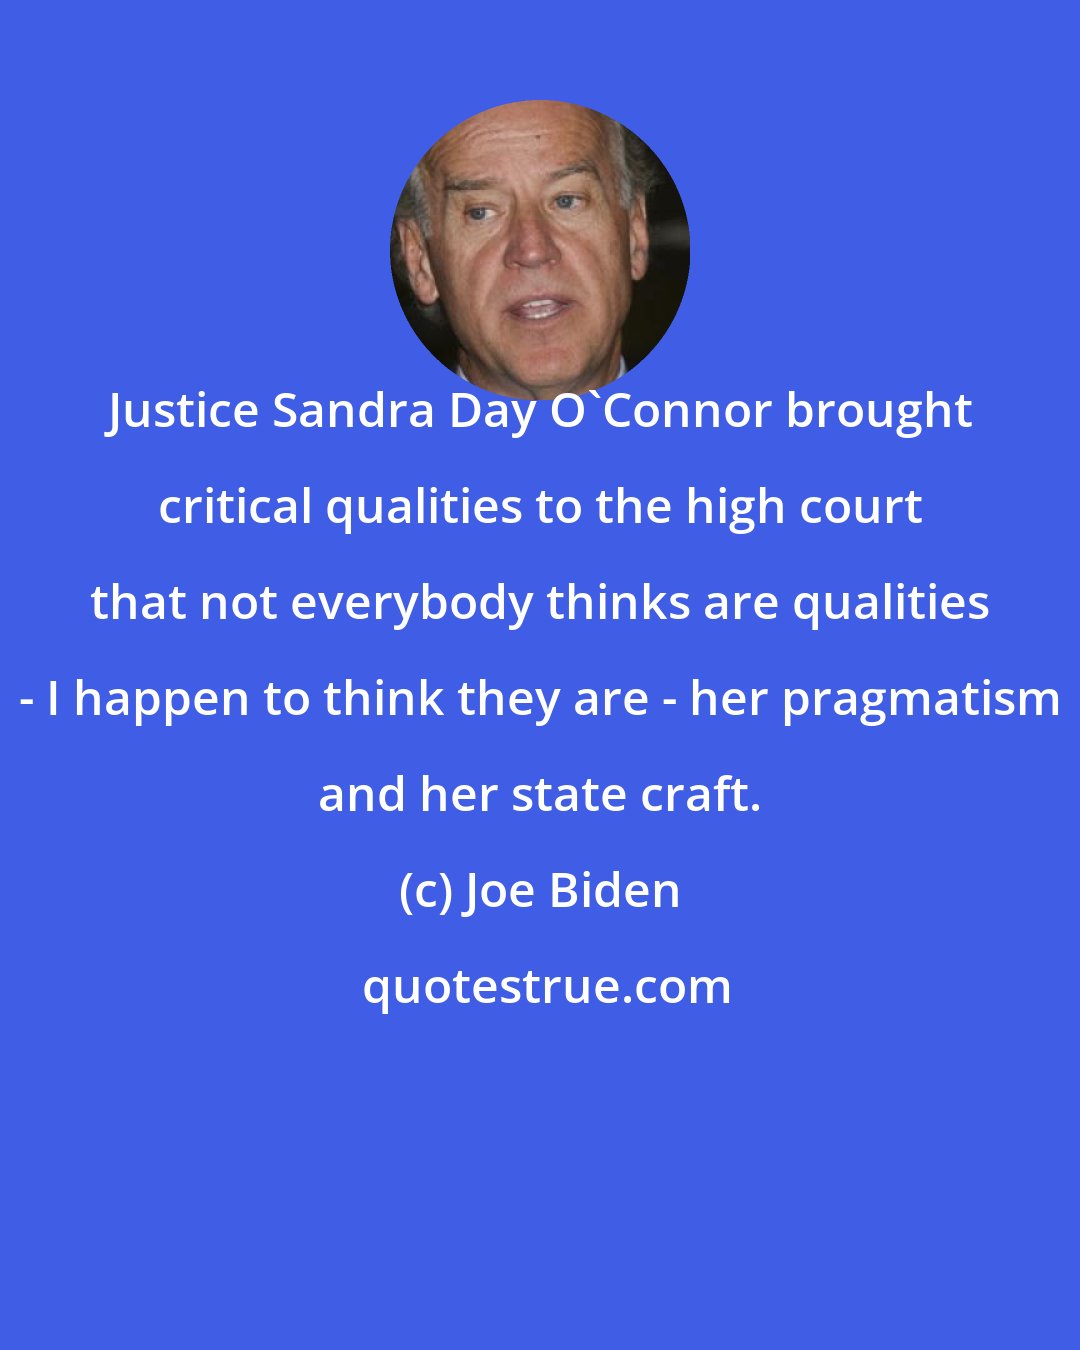 Joe Biden: Justice Sandra Day O'Connor brought critical qualities to the high court that not everybody thinks are qualities - I happen to think they are - her pragmatism and her state craft.